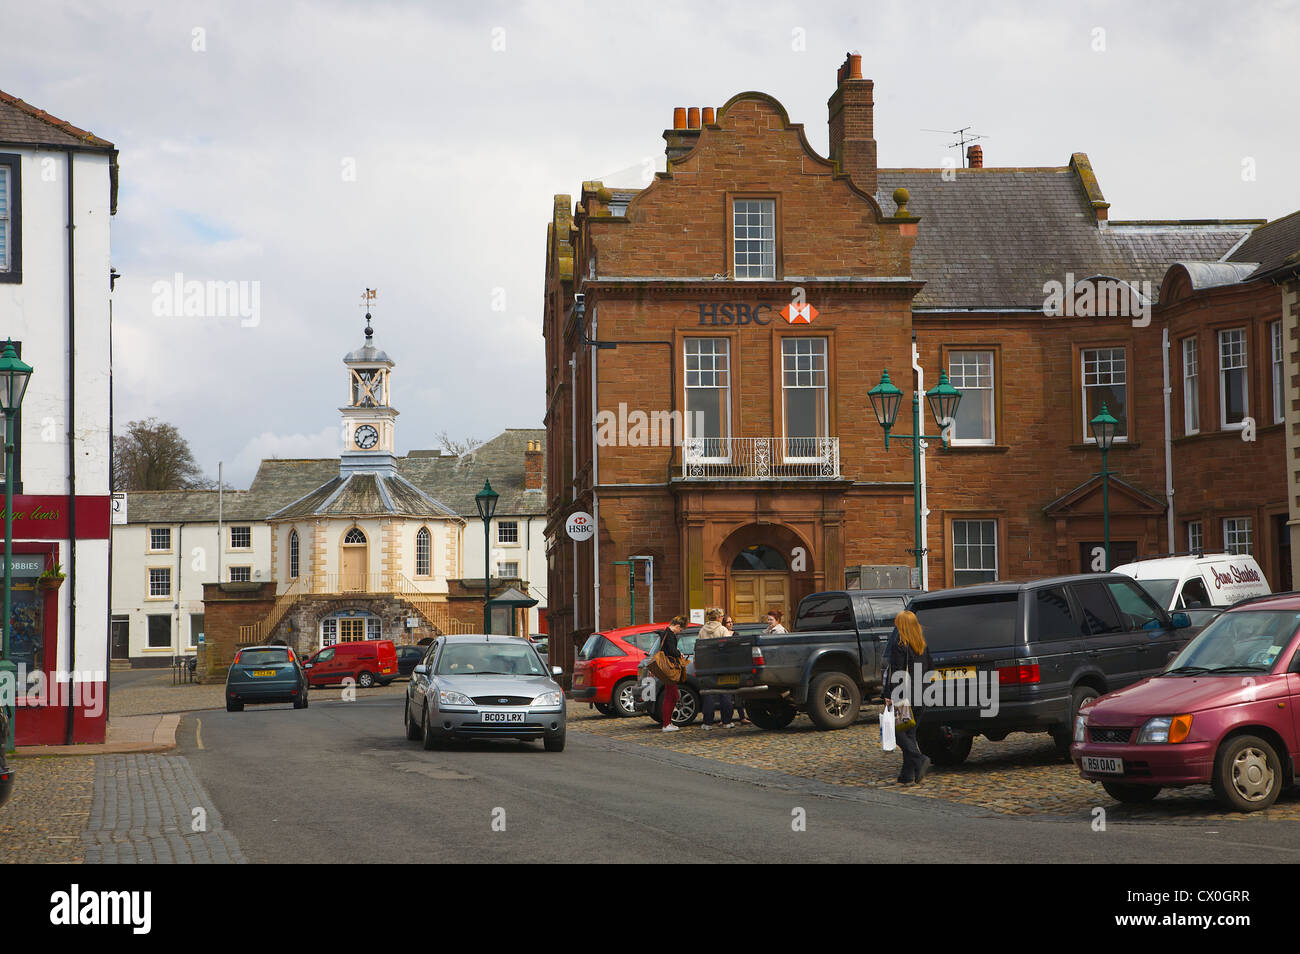 Brampton town centre with the Moot Hall on left, and HSBC Bank on right Brampton town centre, Brampton, Cumbria, England, UK Stock Photo